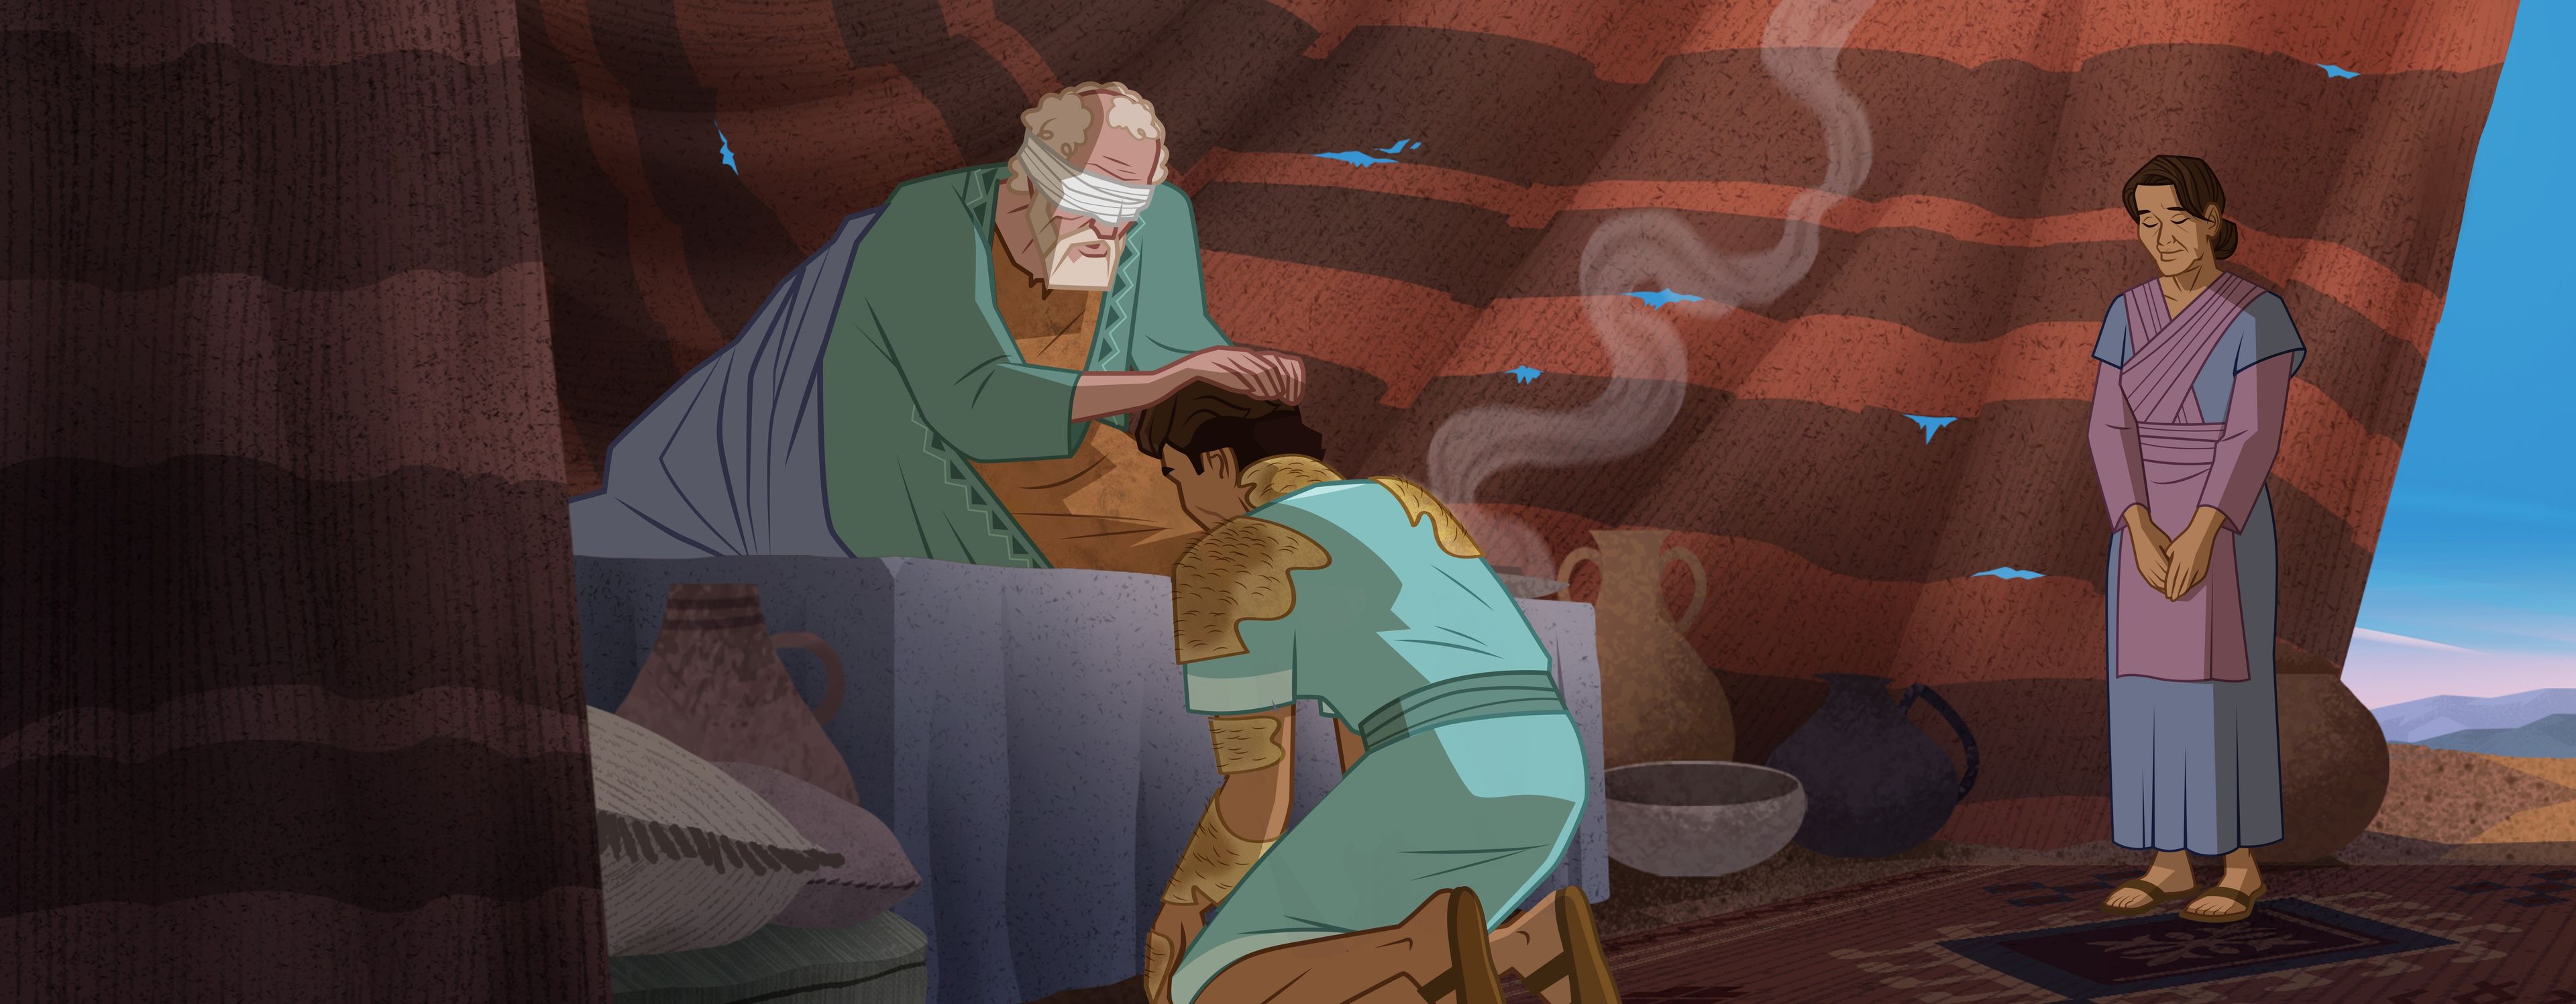 Illustration of Isaac giving Jacob blessing. Genesis 27:18–29